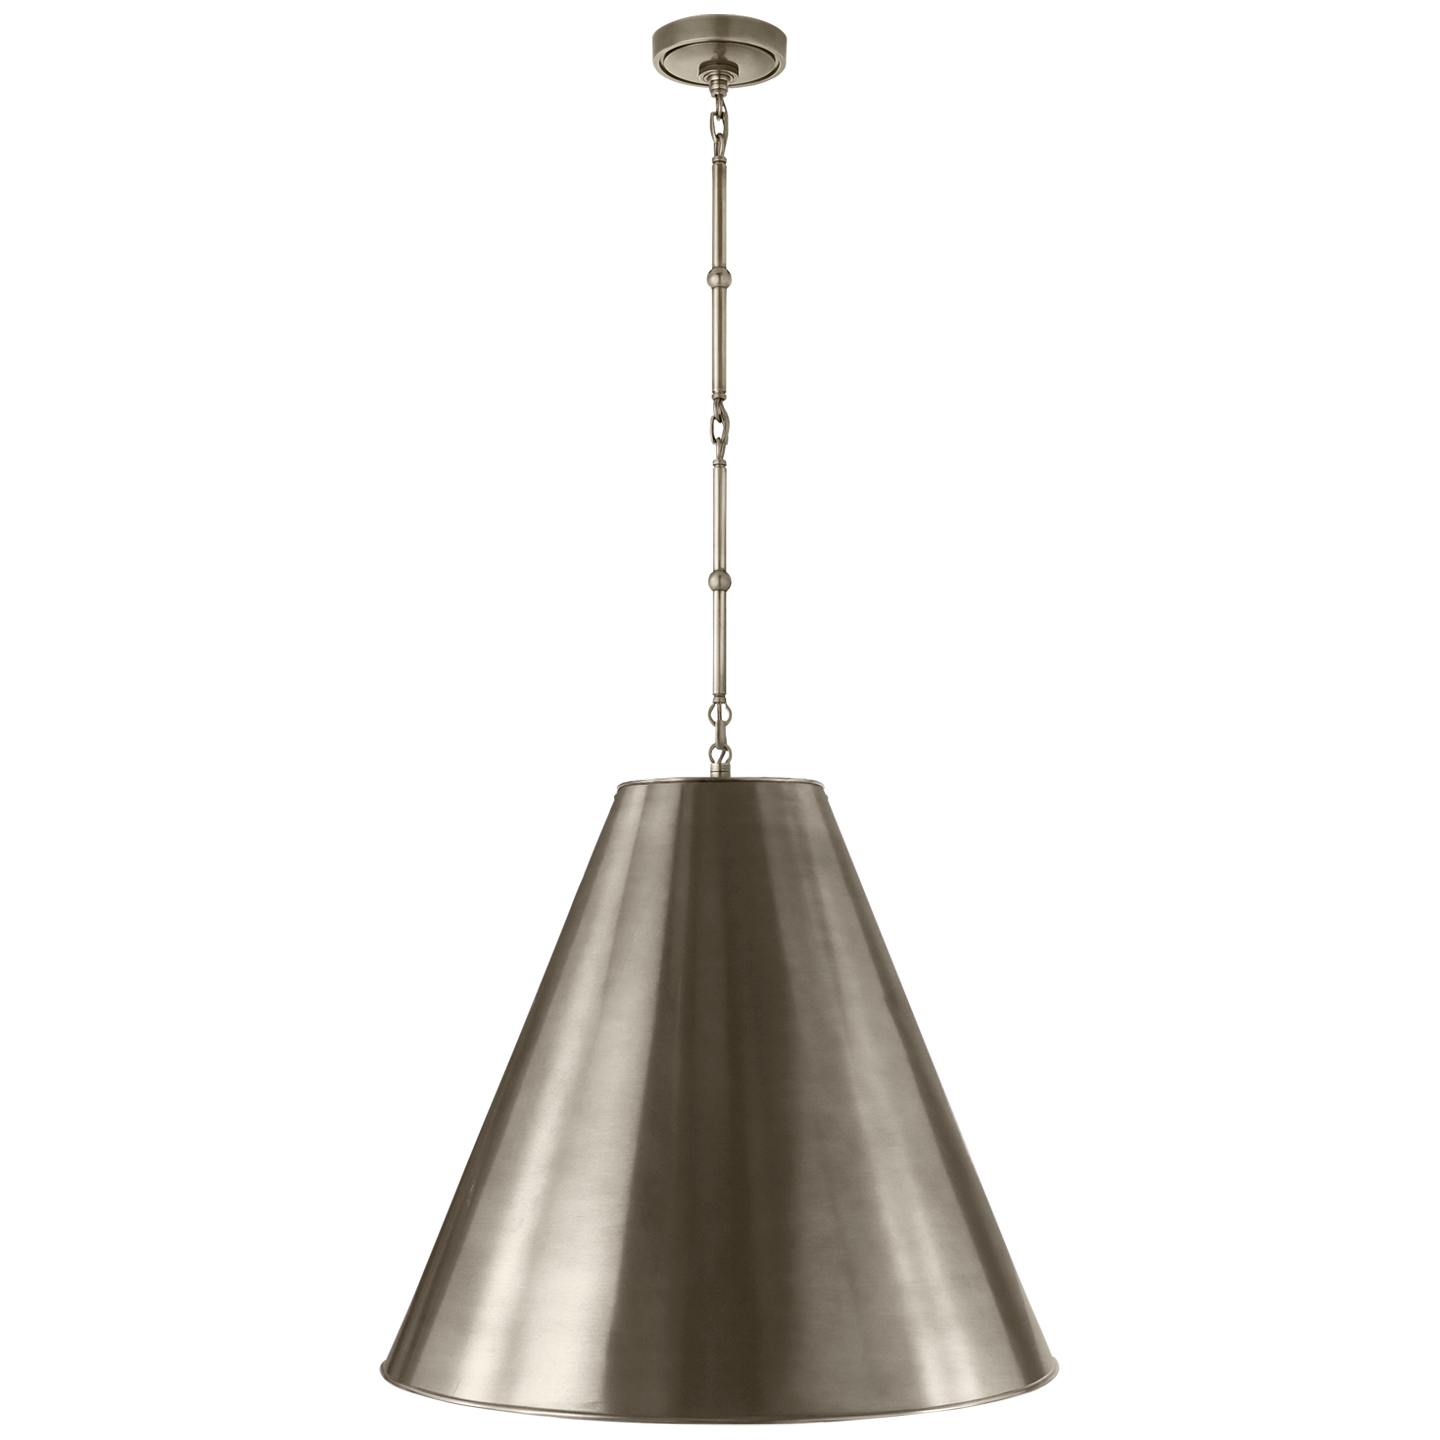 We love all the industrial vibes that come with this Goodman Large Hanging Lamp. Available in three different finishes, we would love to see this hanging over a kitchen island, sink, or other large area